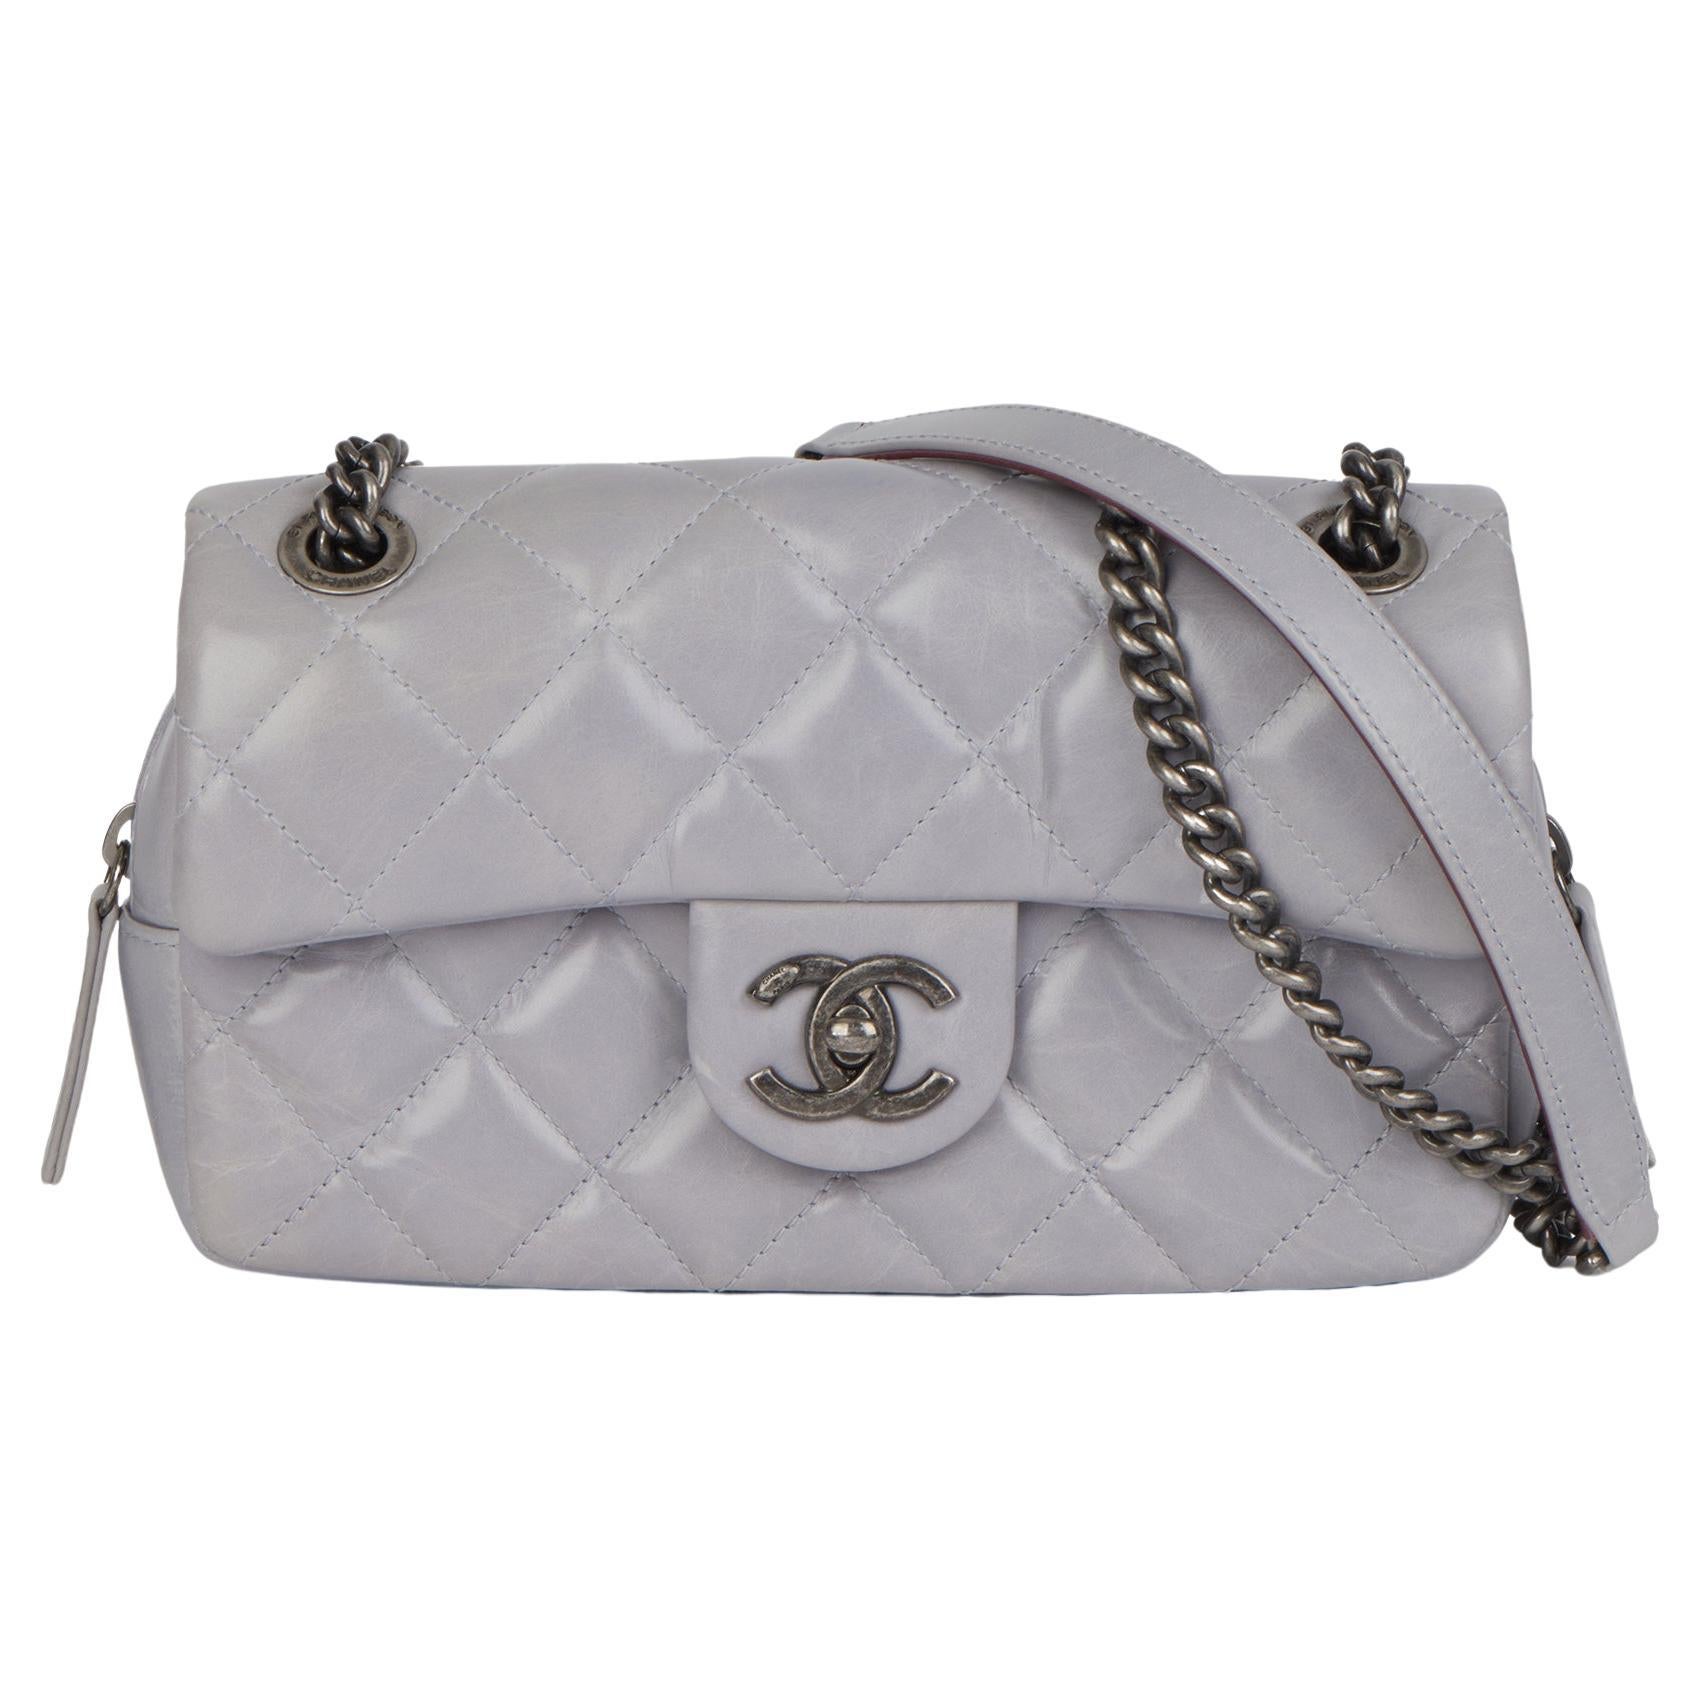 Chanel GREY QUILTED SHINY CALFSKIN LEATHER MINI EASY CARRY FLAP BAG